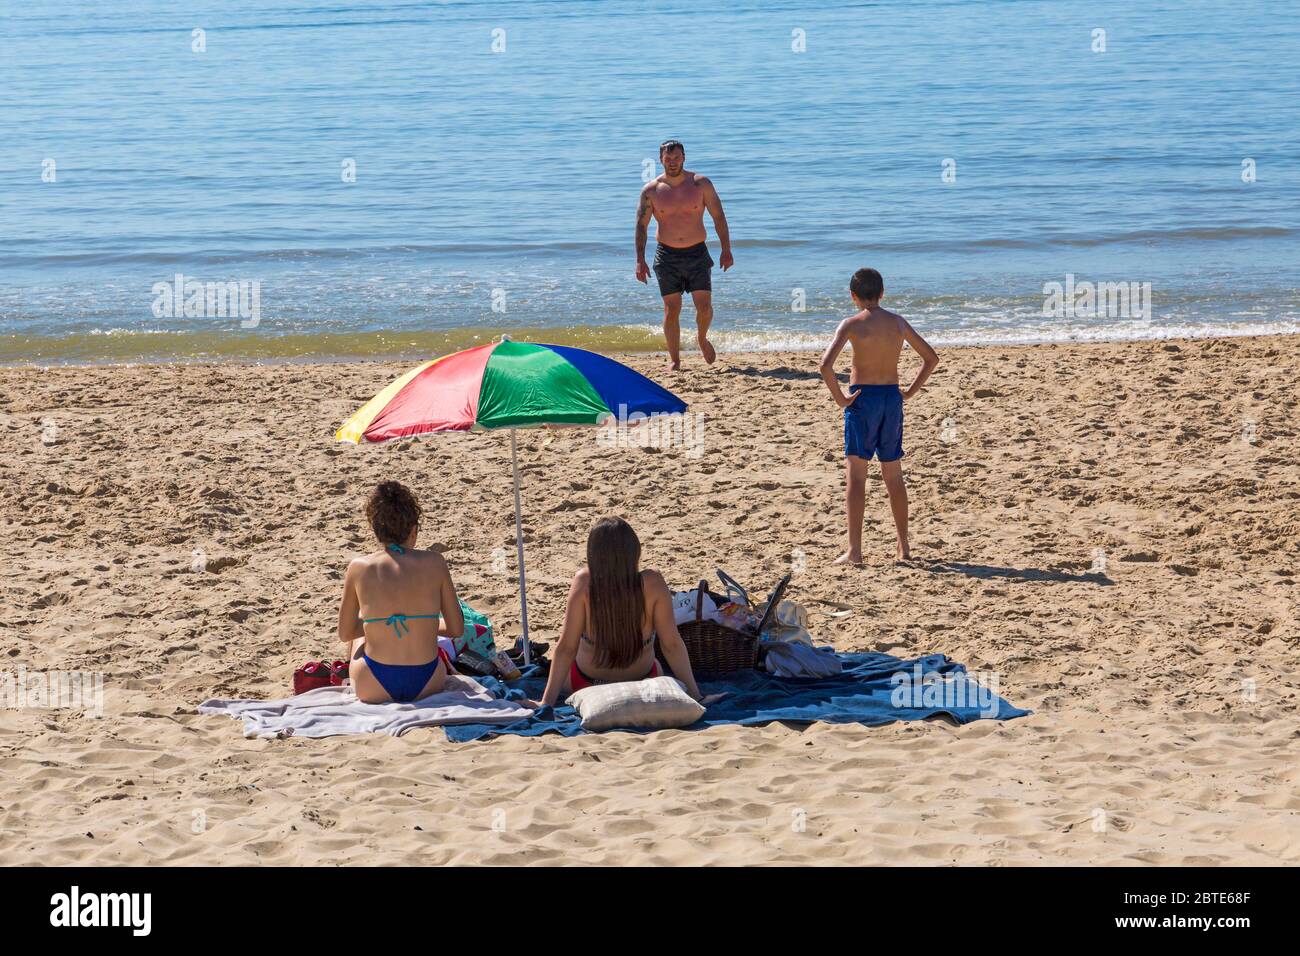 Bournemouth, Dorset UK. 25th May 2020. UK weather: scorching hot at Bournemouth beaches with clear blue skies and unbroken sunshine, as temperatures soar on Bank Holiday Monday. Sunseekers flock to the seaside, getting there early to get a good spot, as beaches get packed. Credit: Carolyn Jenkins/Alamy Live News Stock Photo